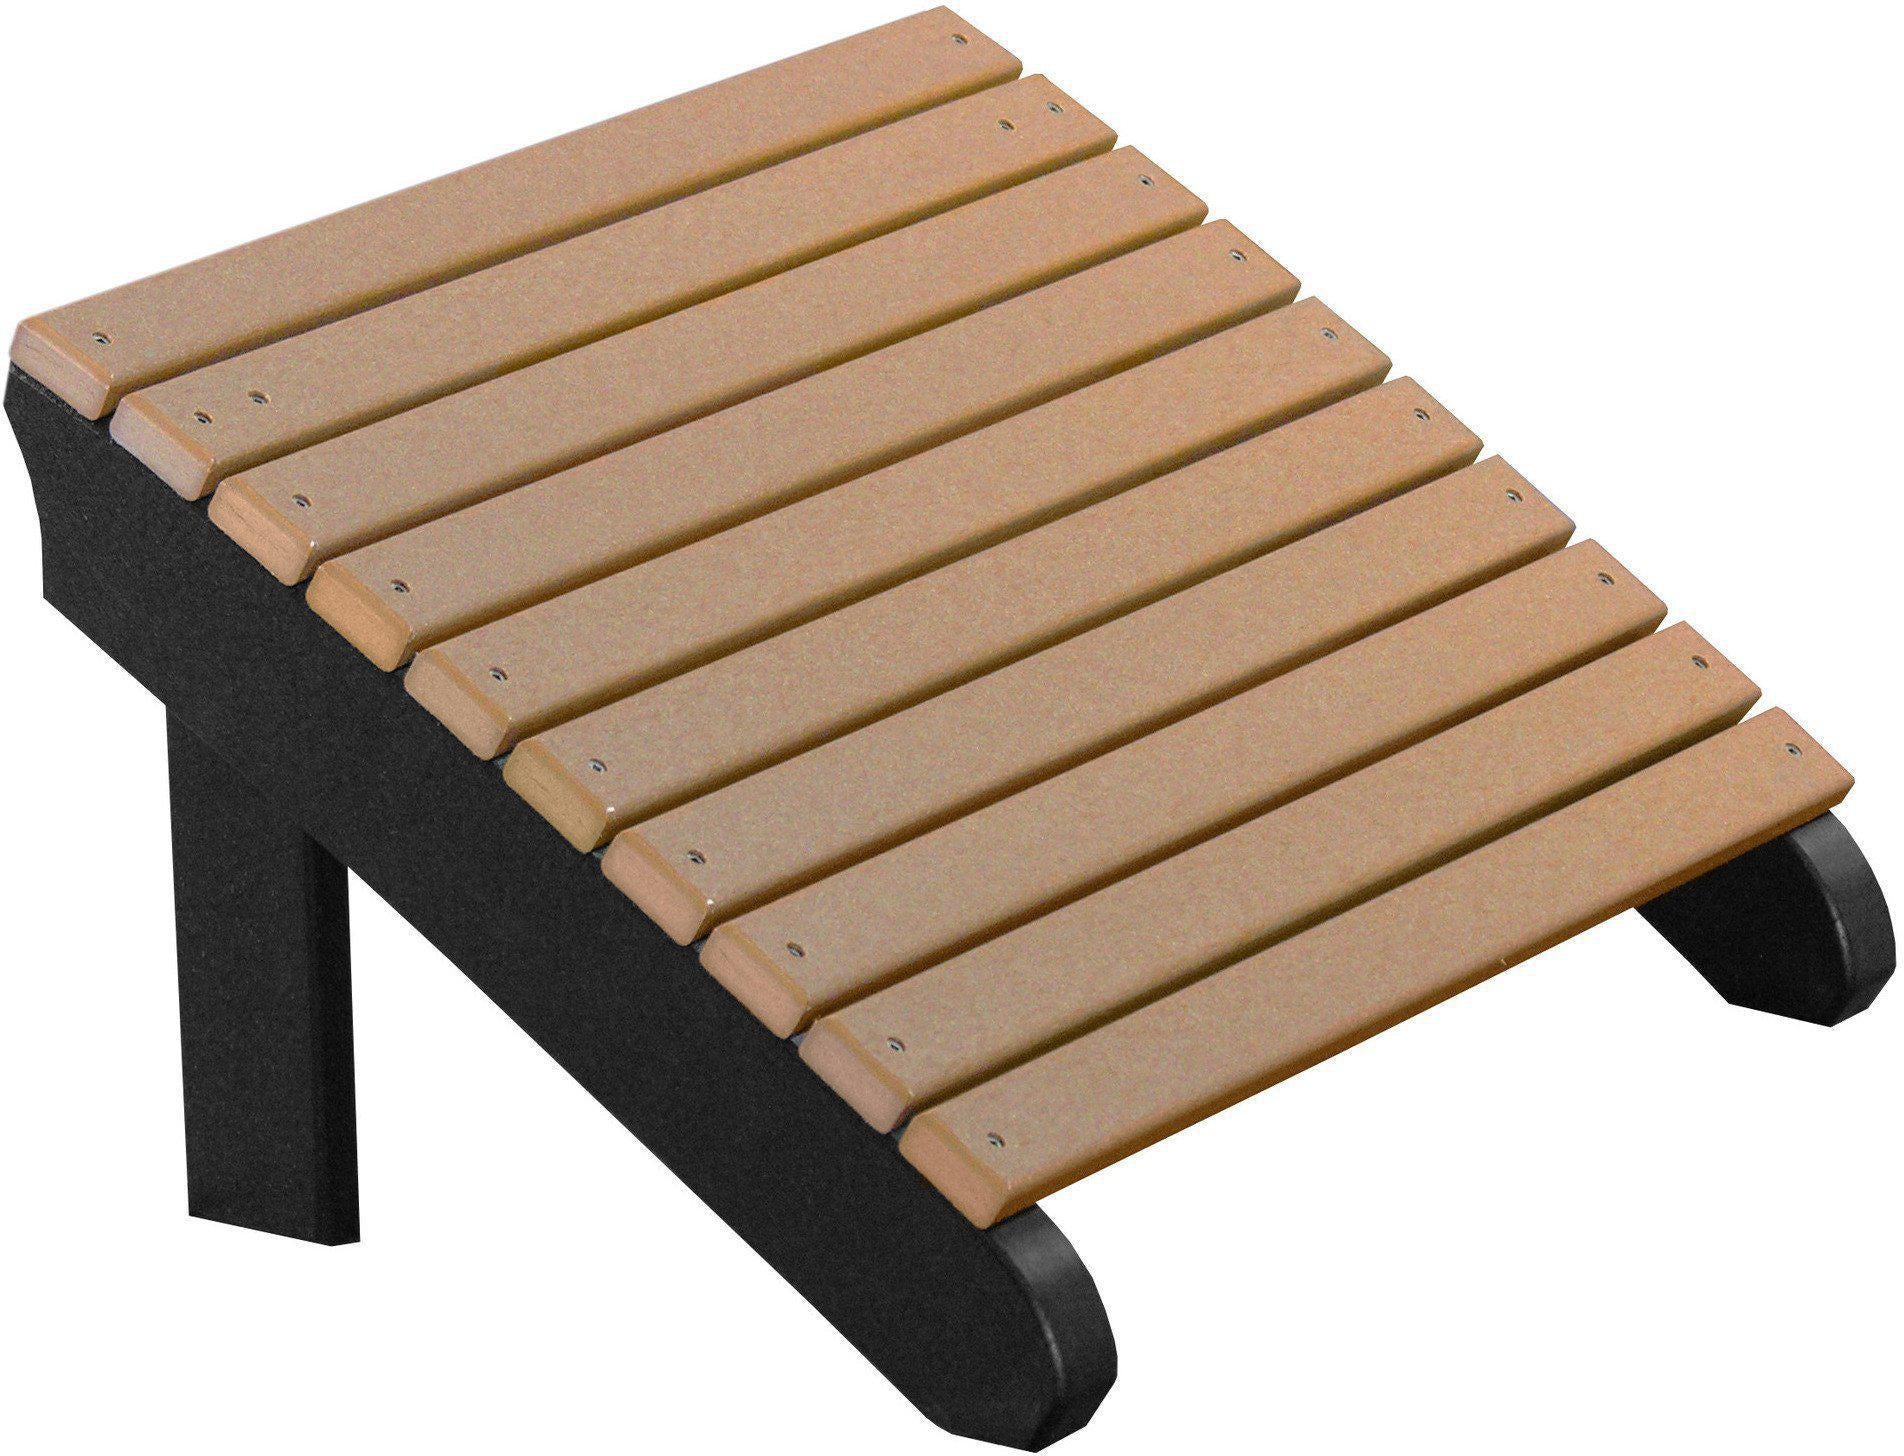 LuxCraft Recycled Plastic Deluxe Adirondack Footrest